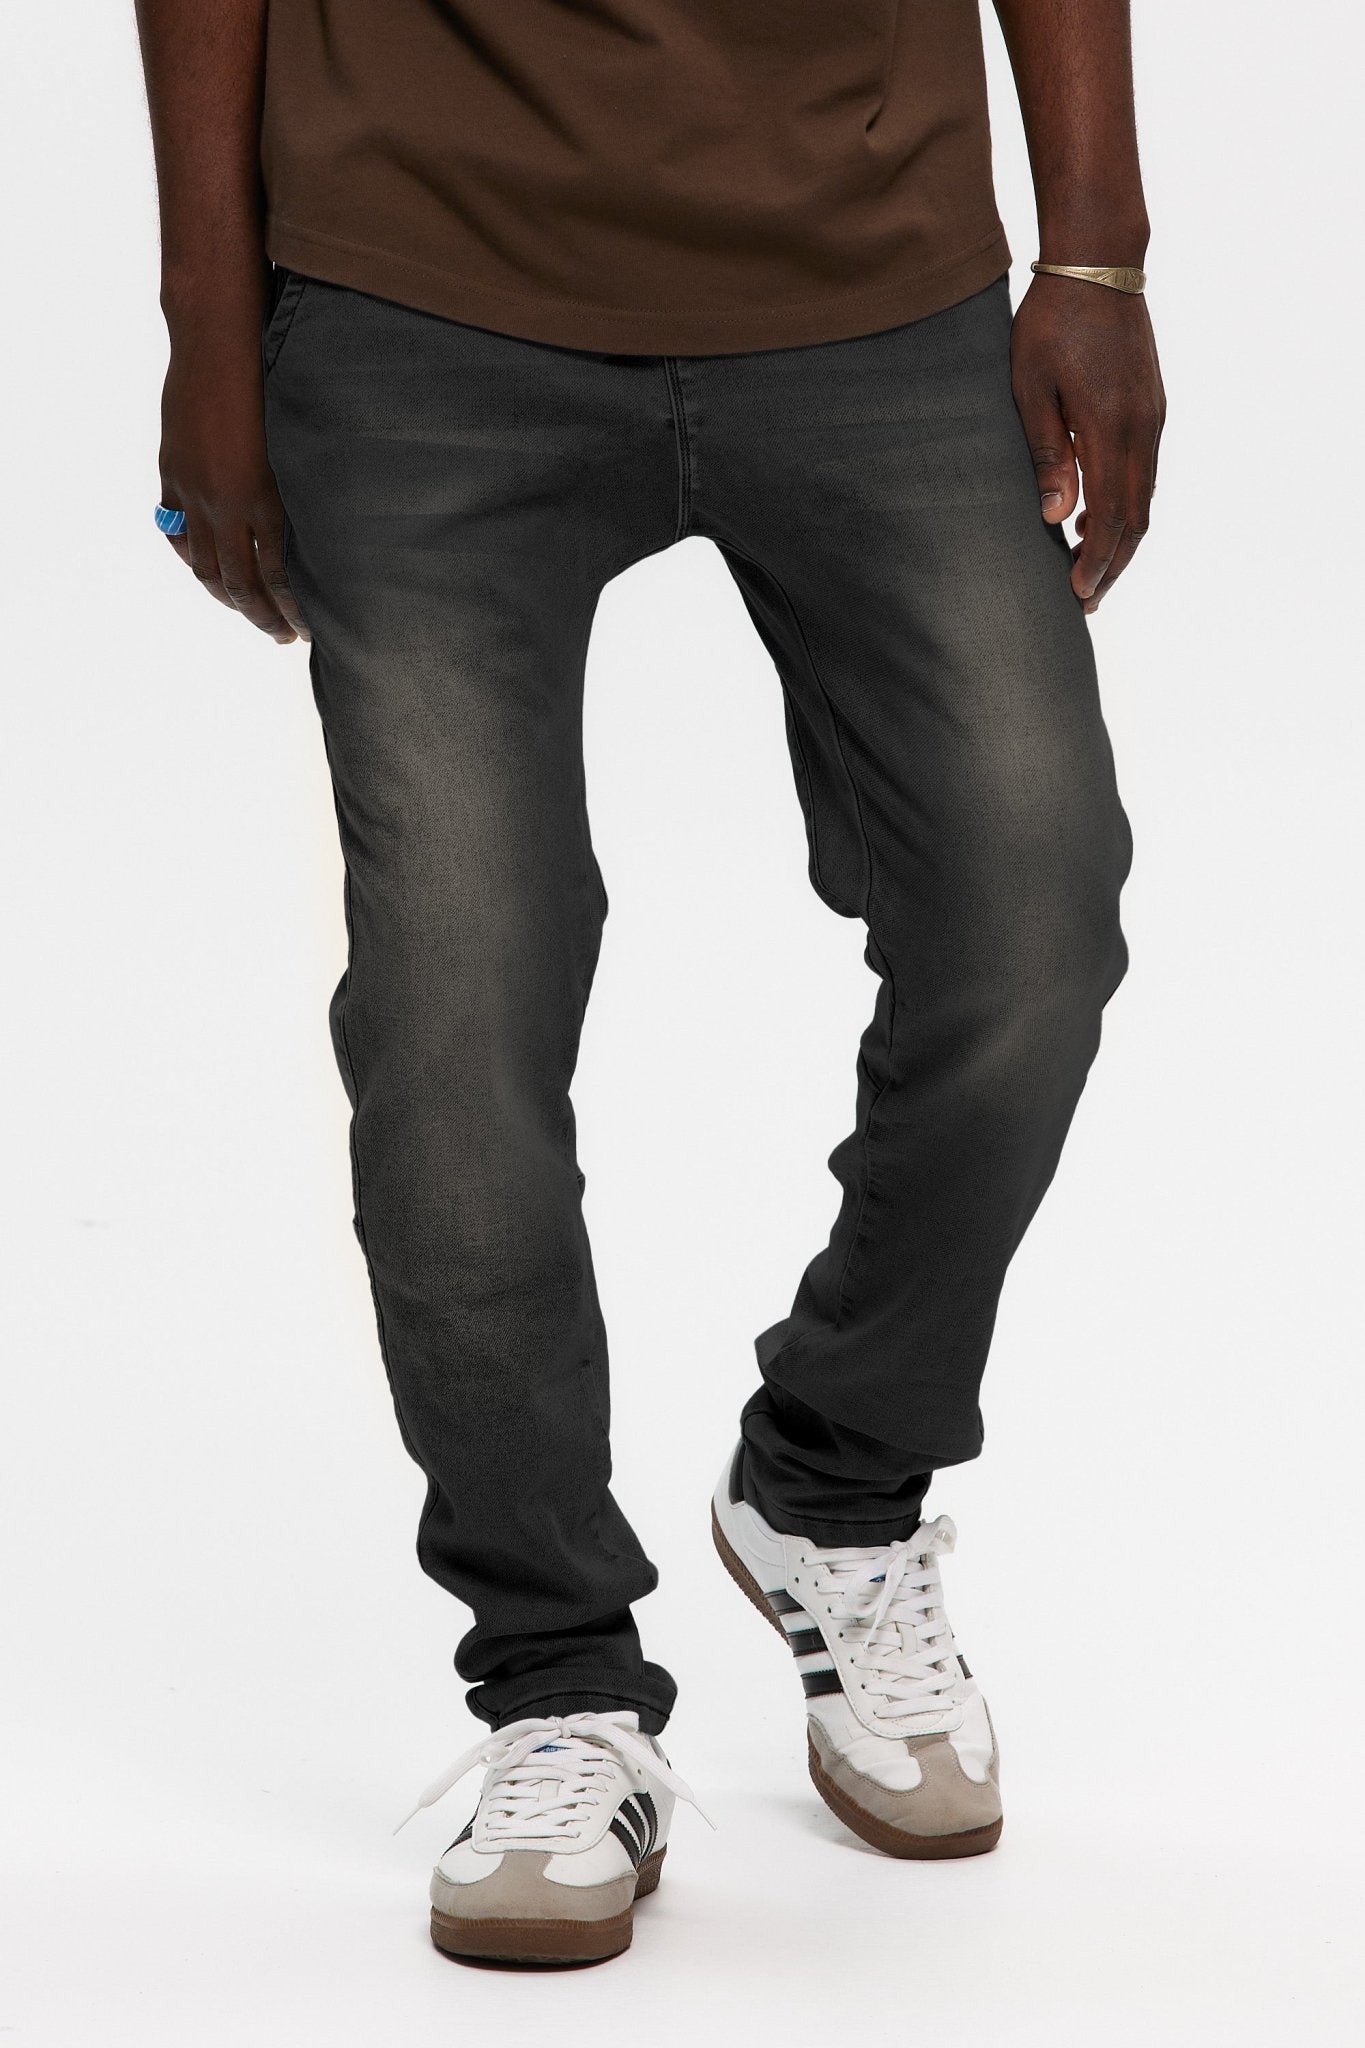 Buy Utility Denim Pant Men's Jeans & Pants from Kuwalla. Find Kuwalla  fashion & more at